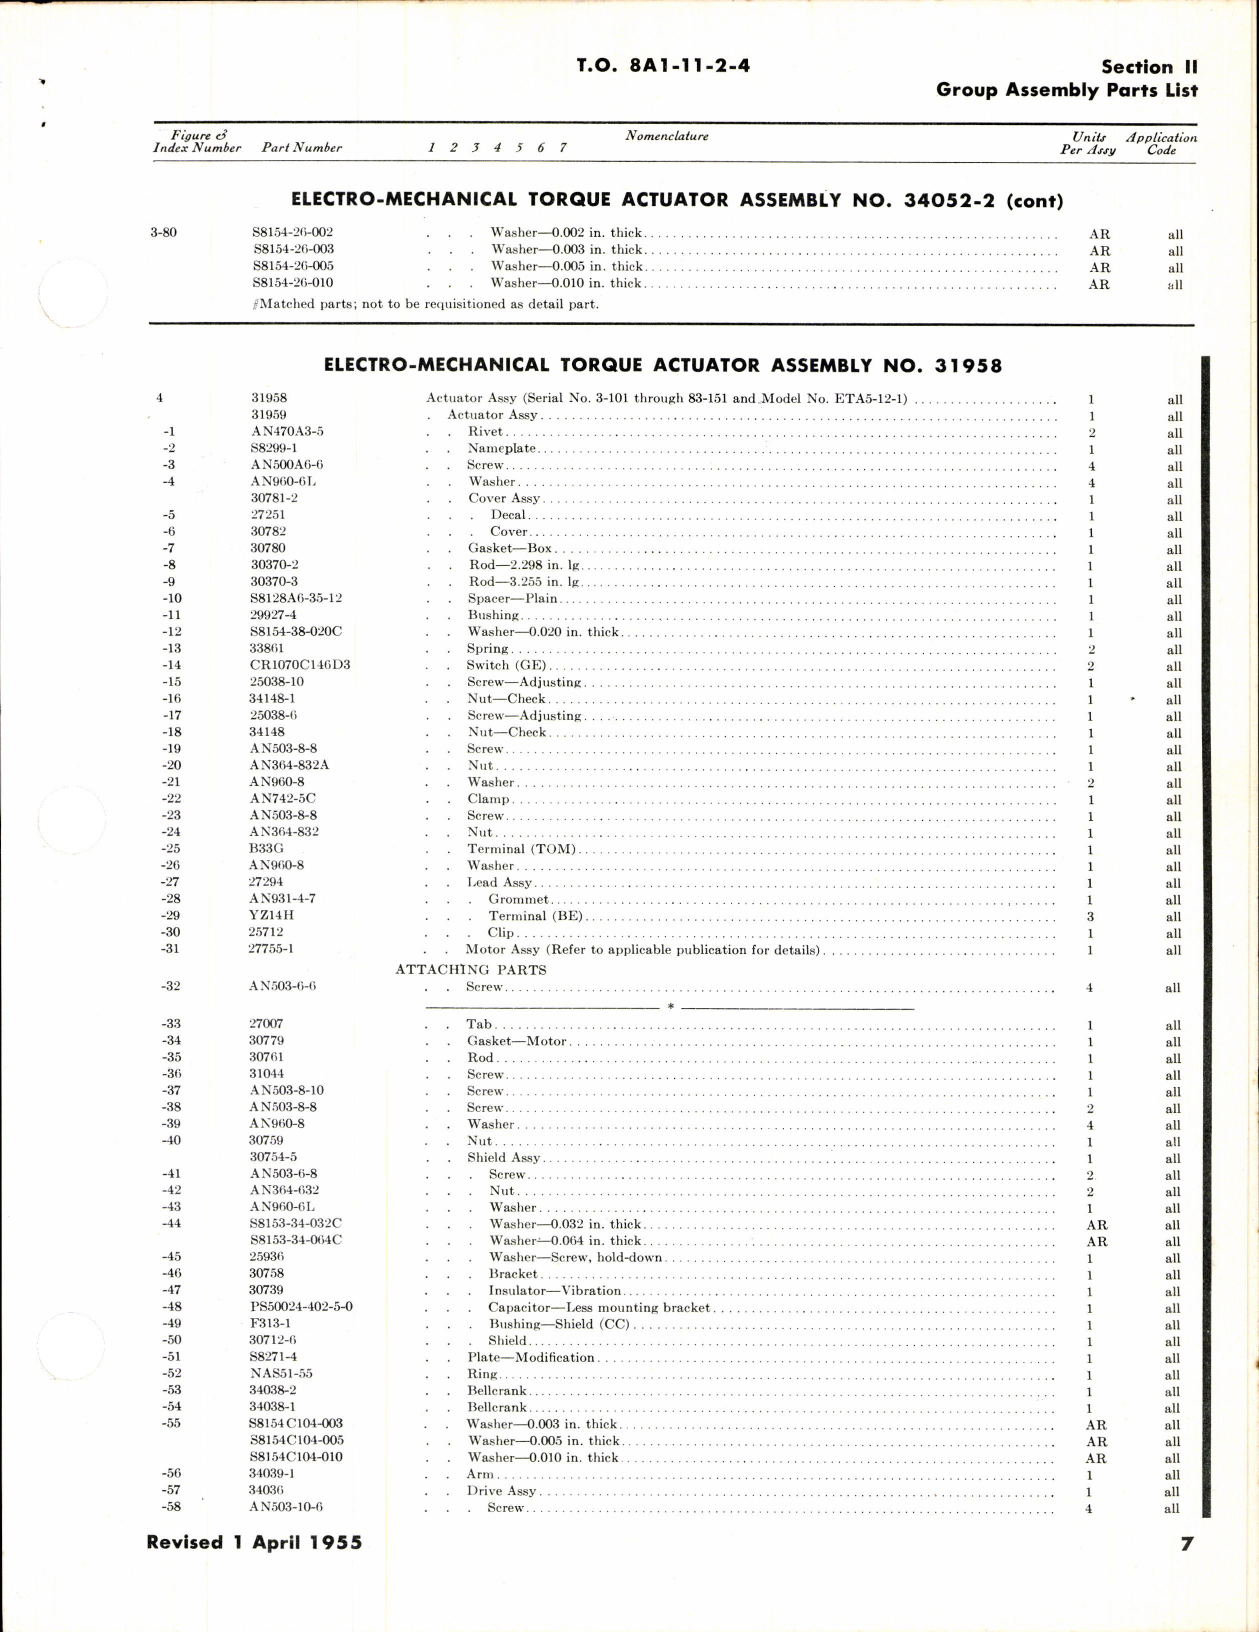 Sample page 3 from AirCorps Library document: Parts Catalog for Electro-Mechanical Torque Actuators